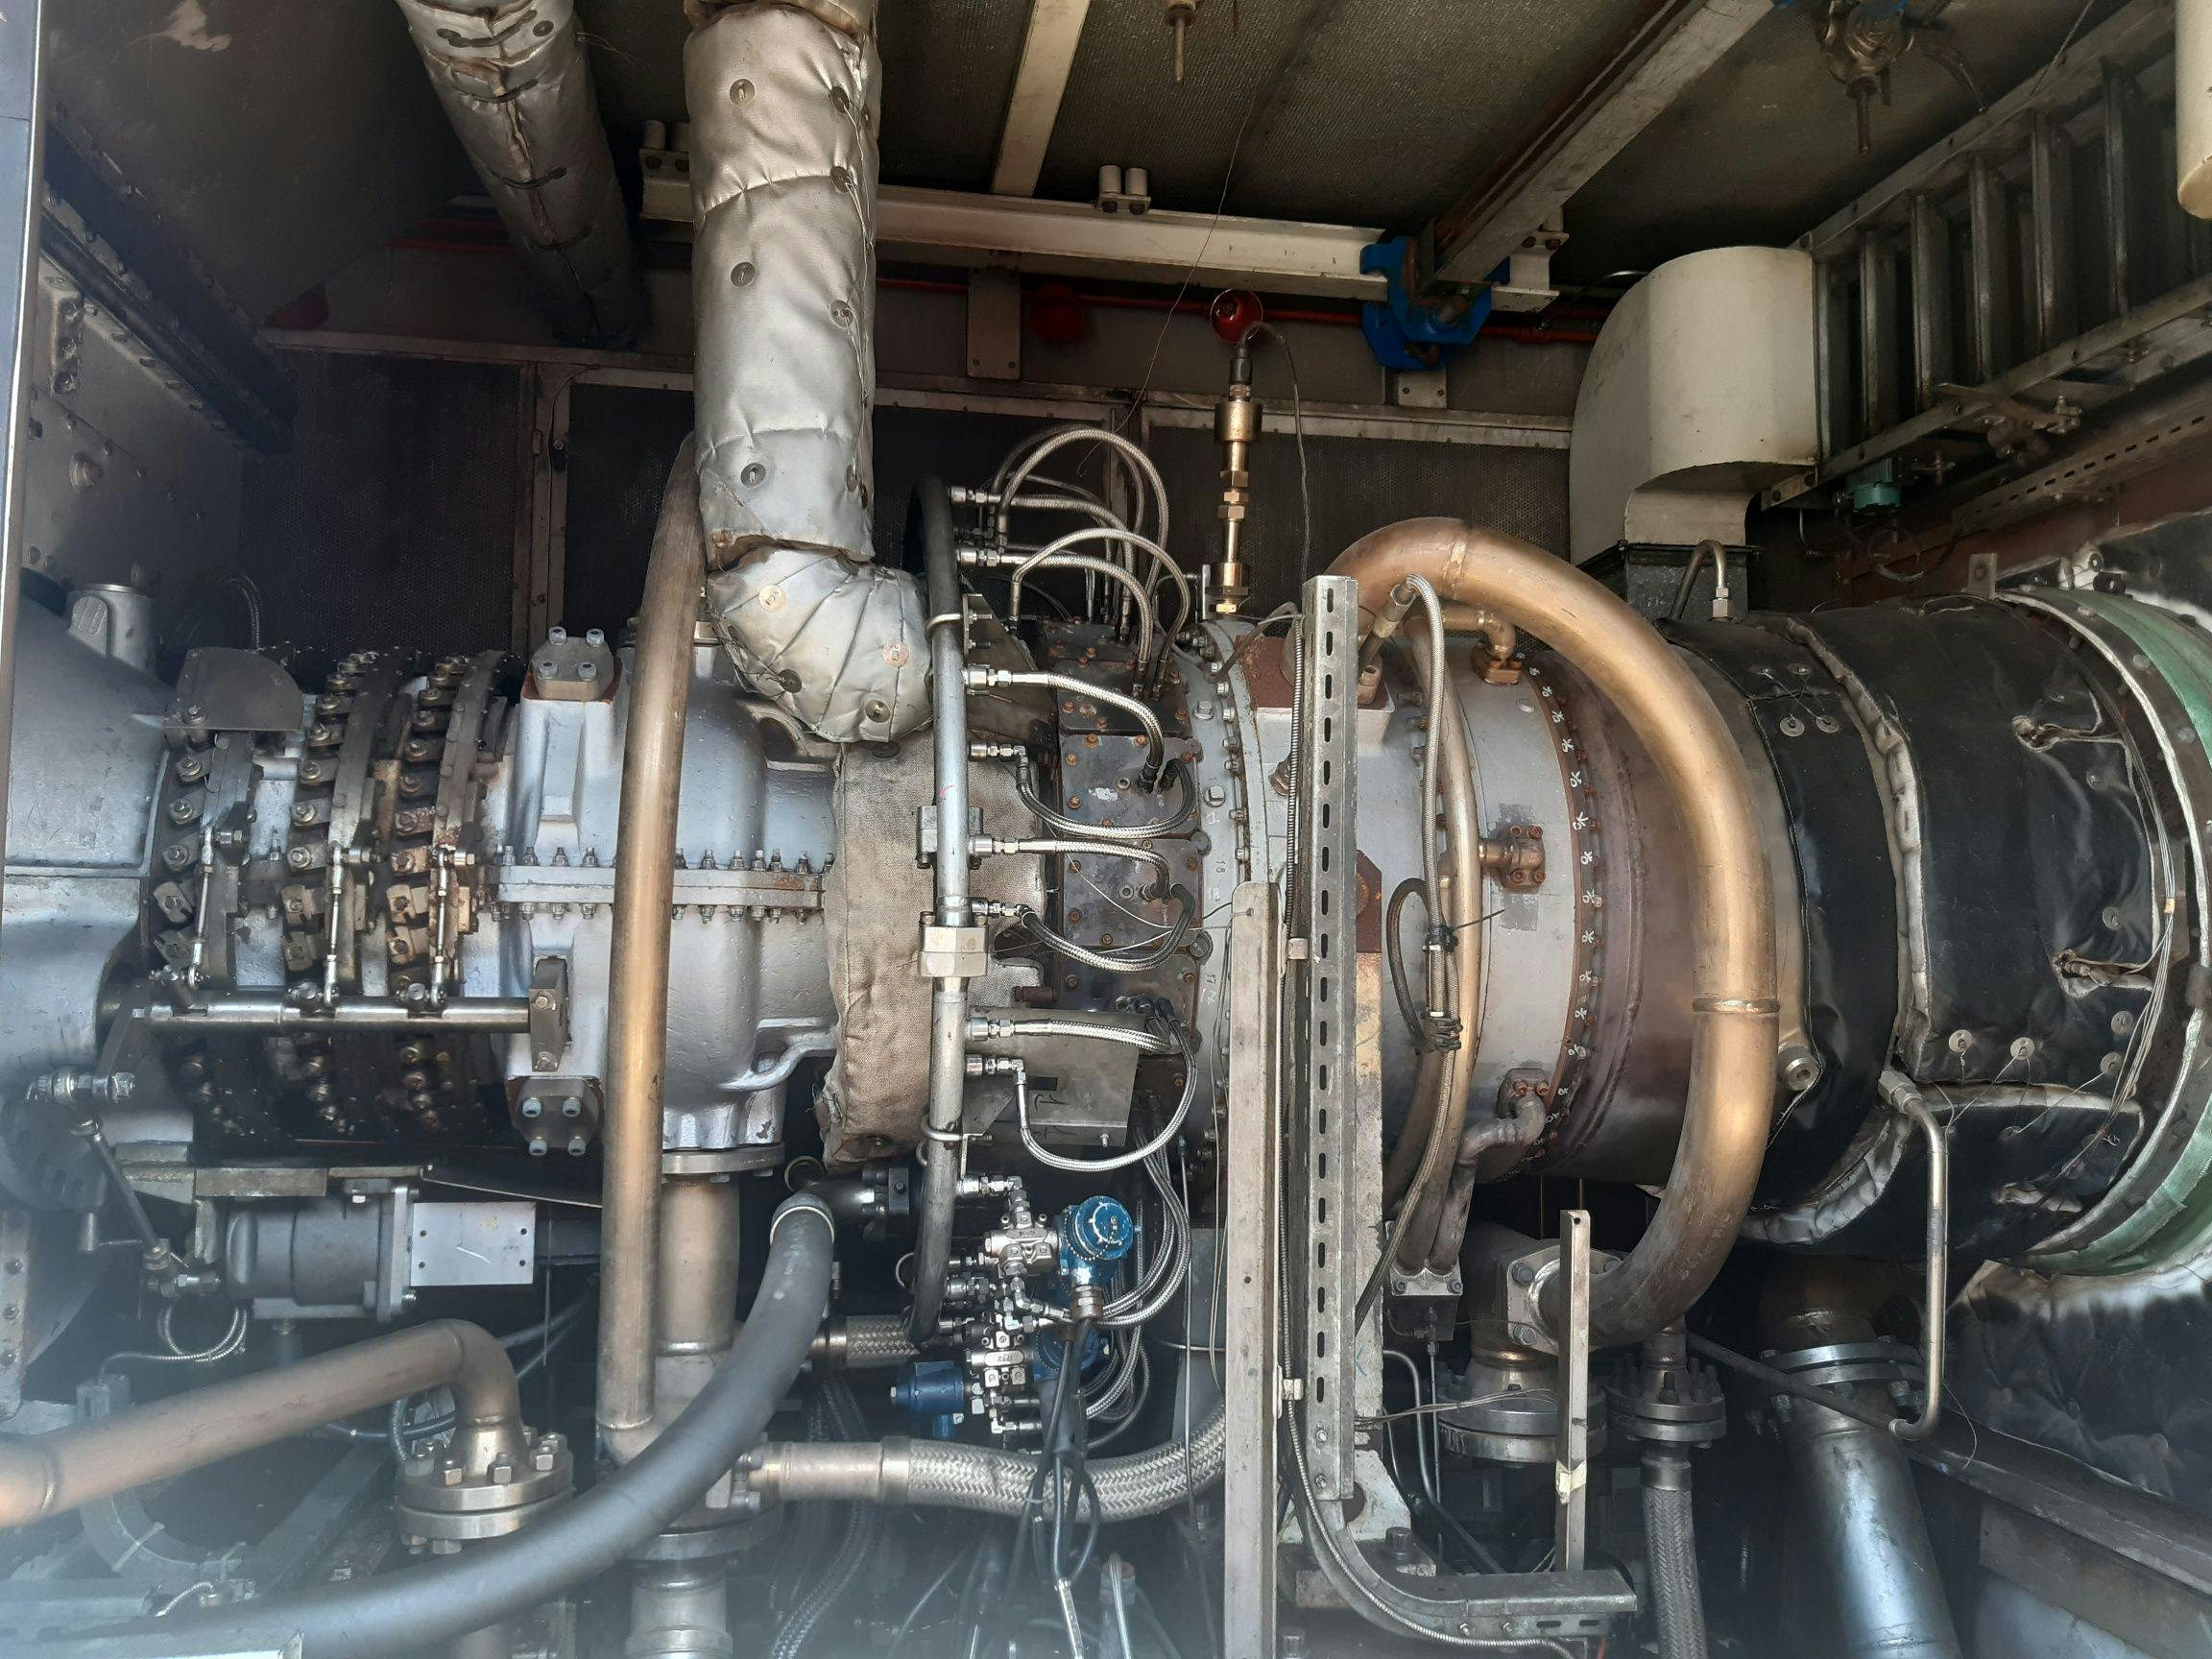 nullPhoto of Turbogas Turbine GE5/1 5MW complete turbogas turbine plant with electric generators - secondhand gas turbine